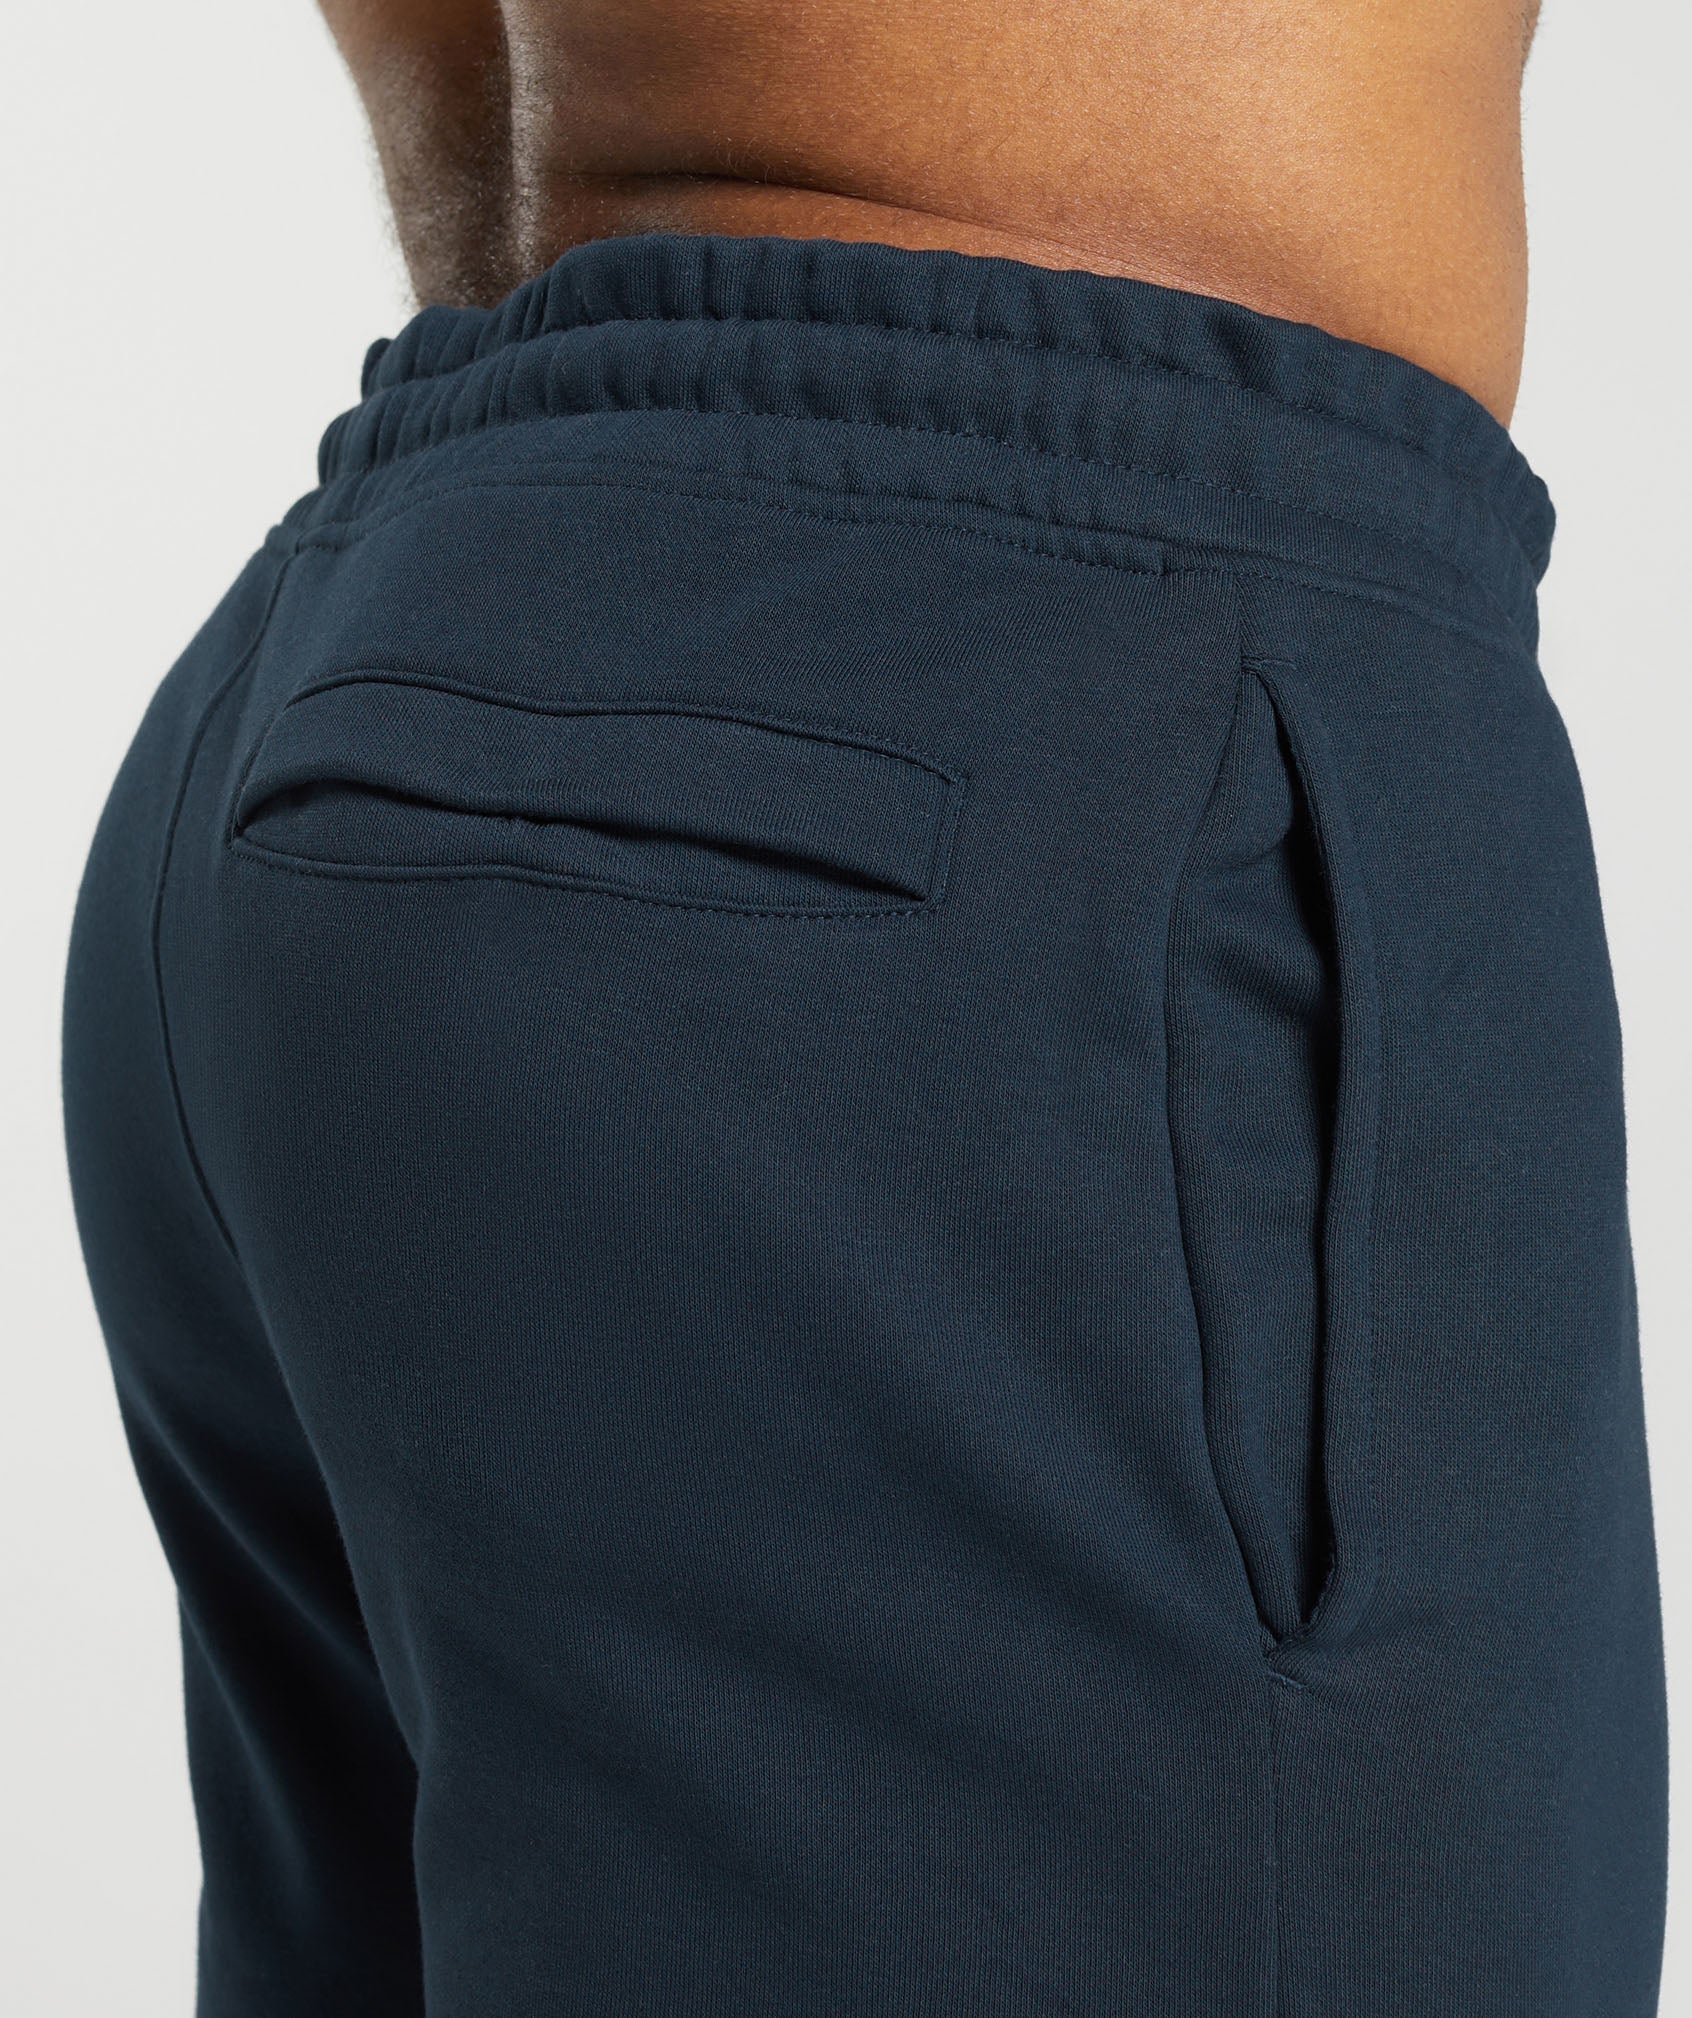 Crest Joggers in Navy - view 5